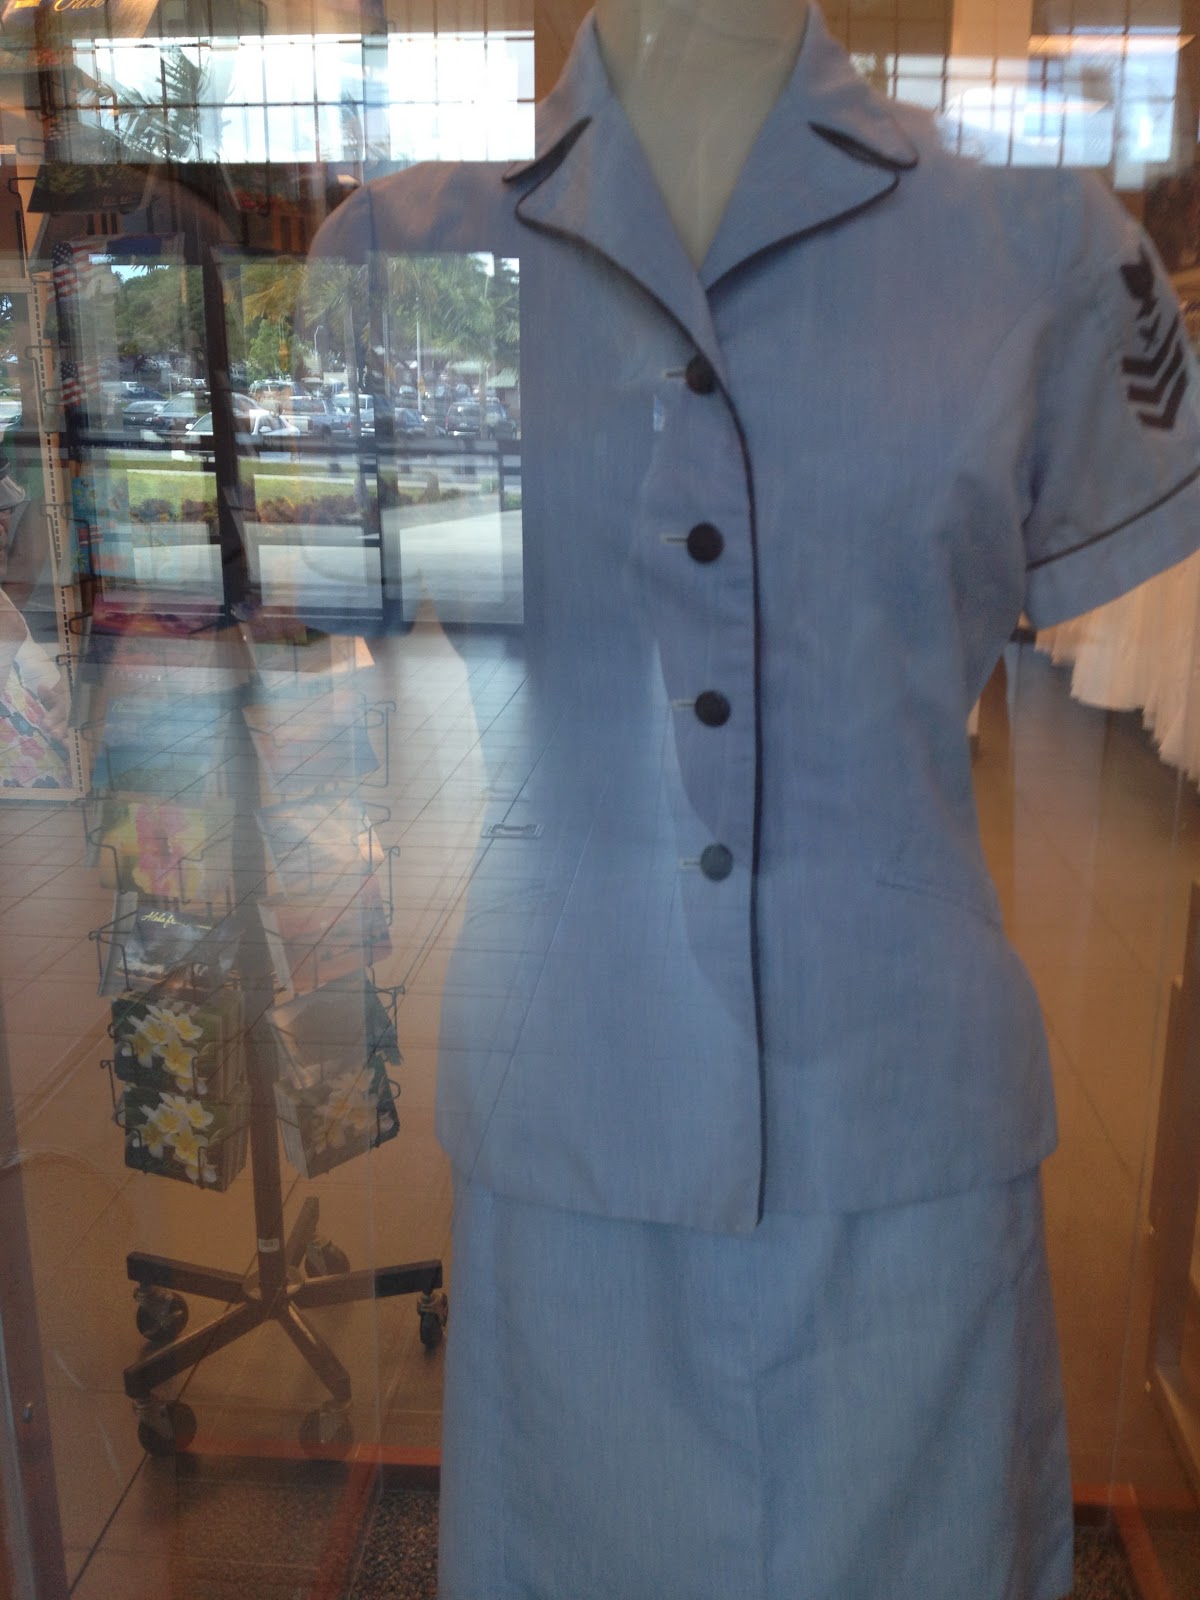 Navy Uniforms For Women 2013 To the uniforms women wore